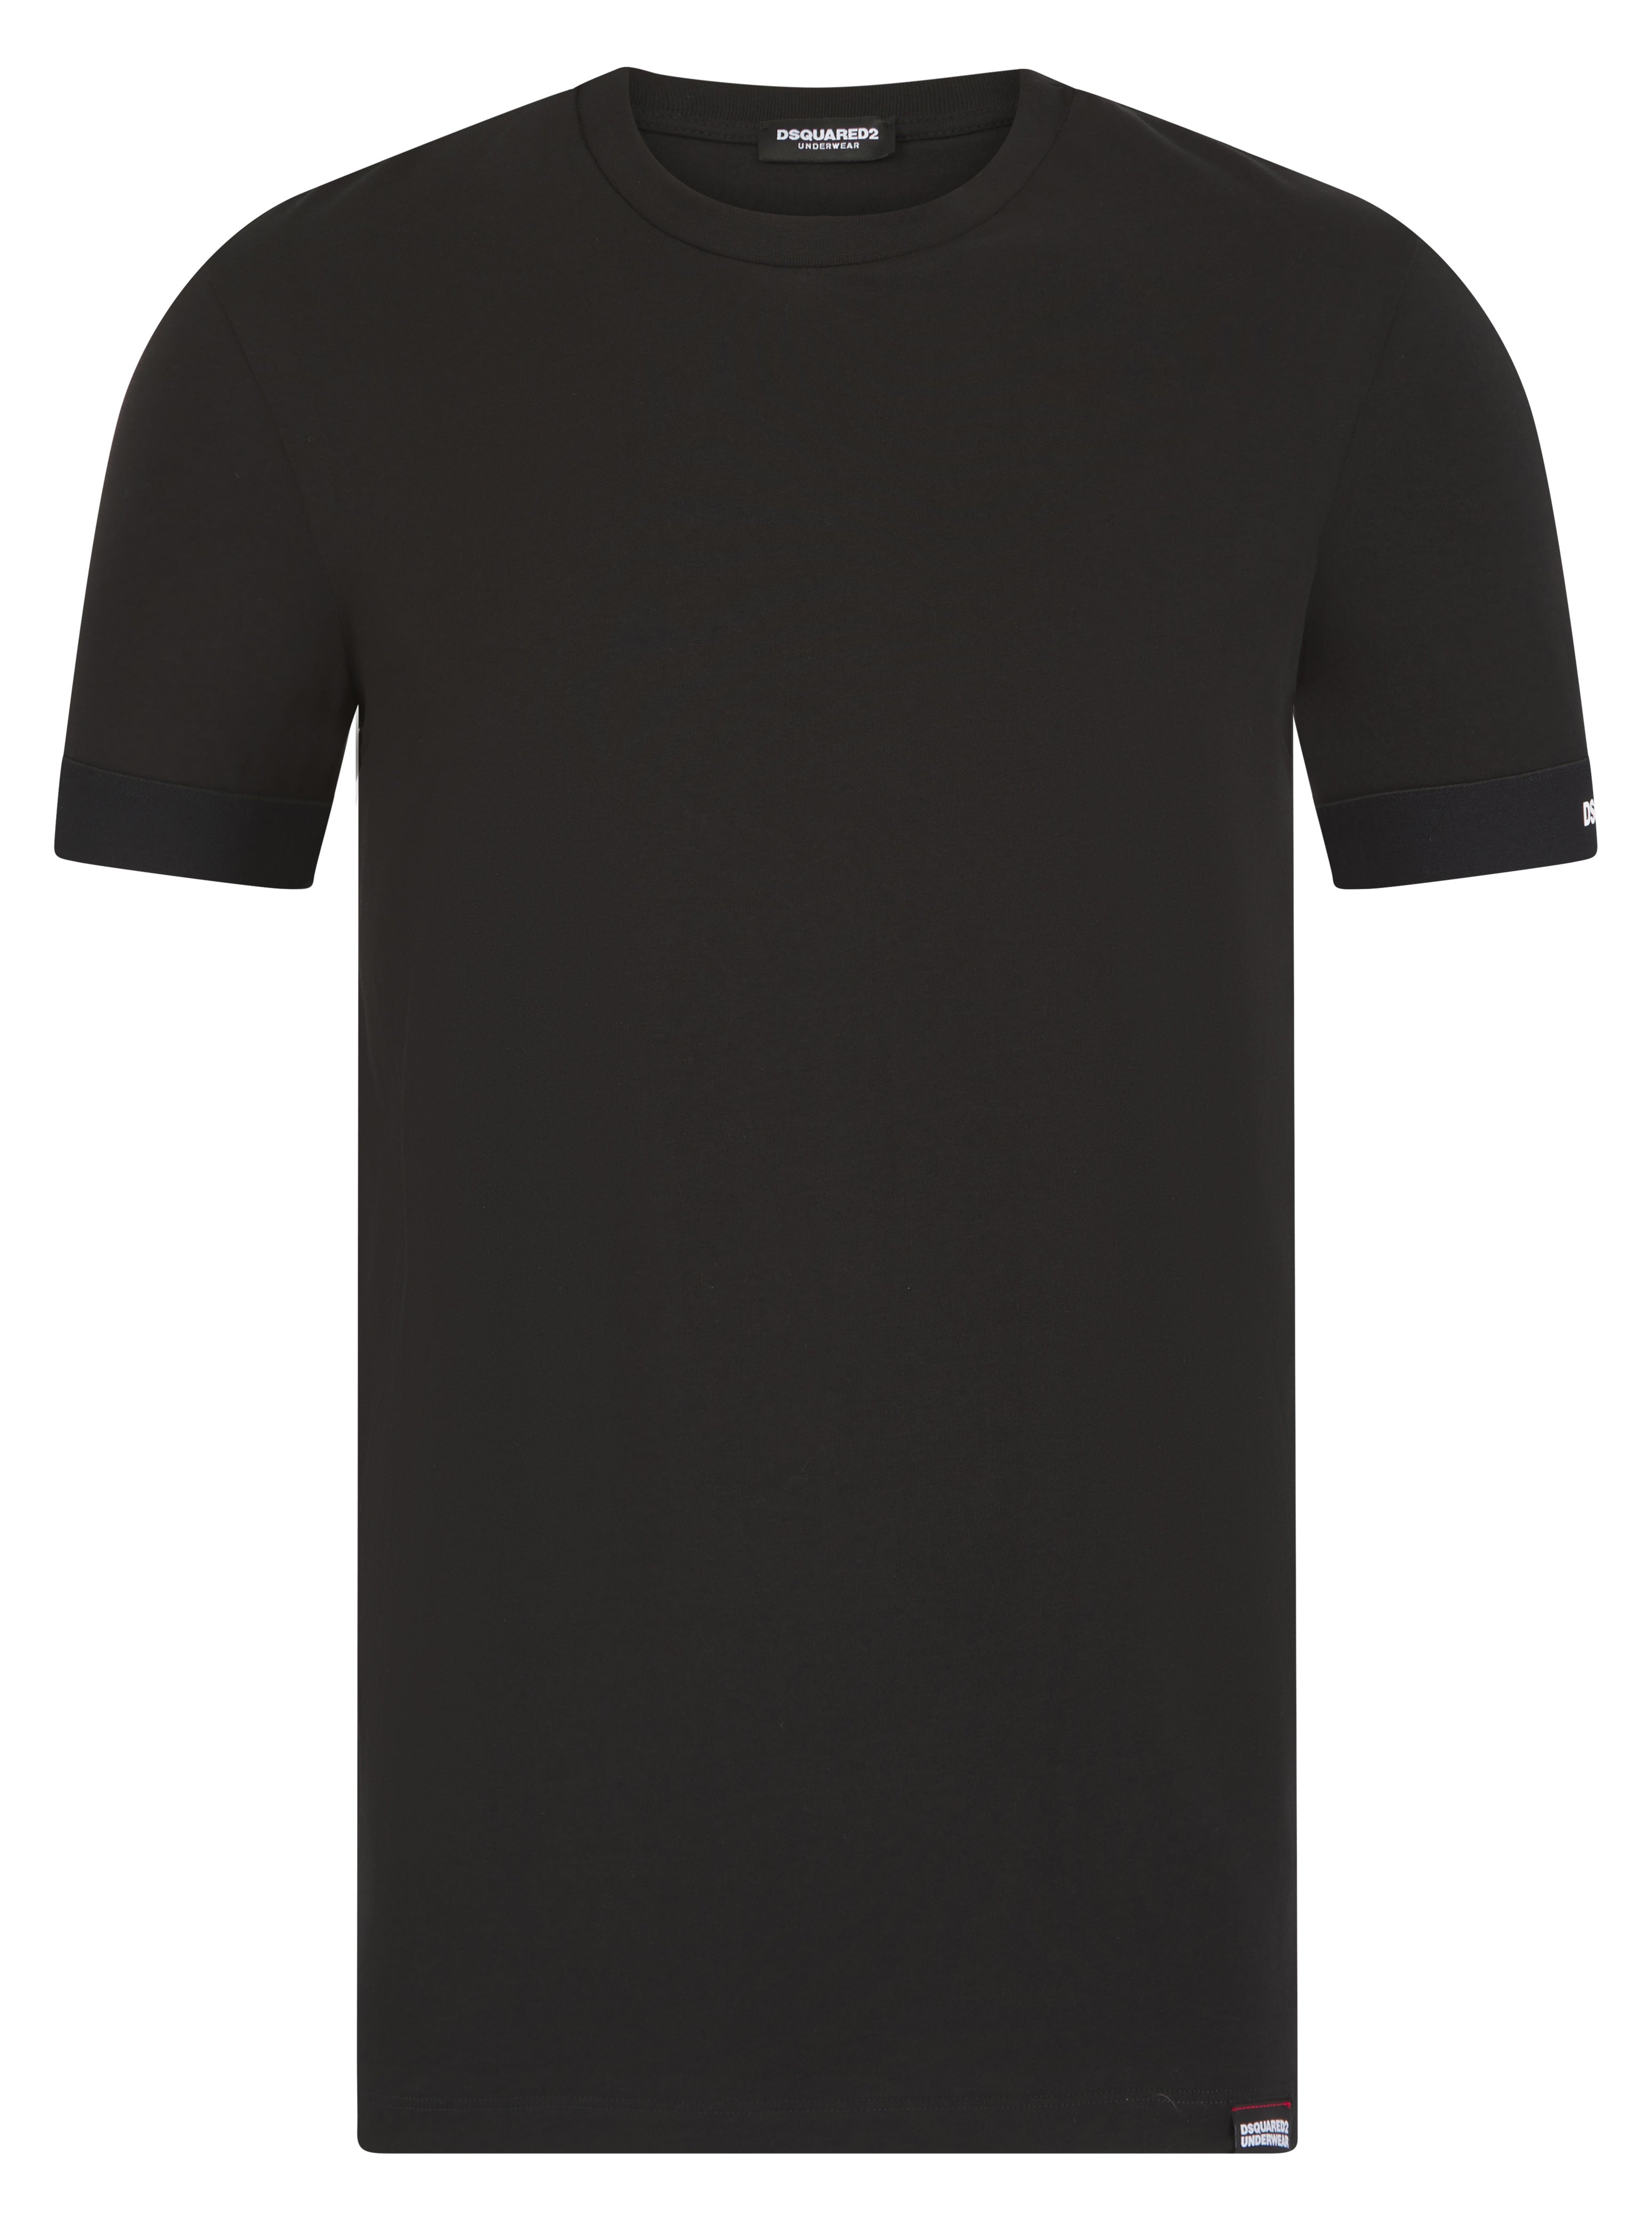 Load image into Gallery viewer, DSquared2 Cuff Logo Tee Black
